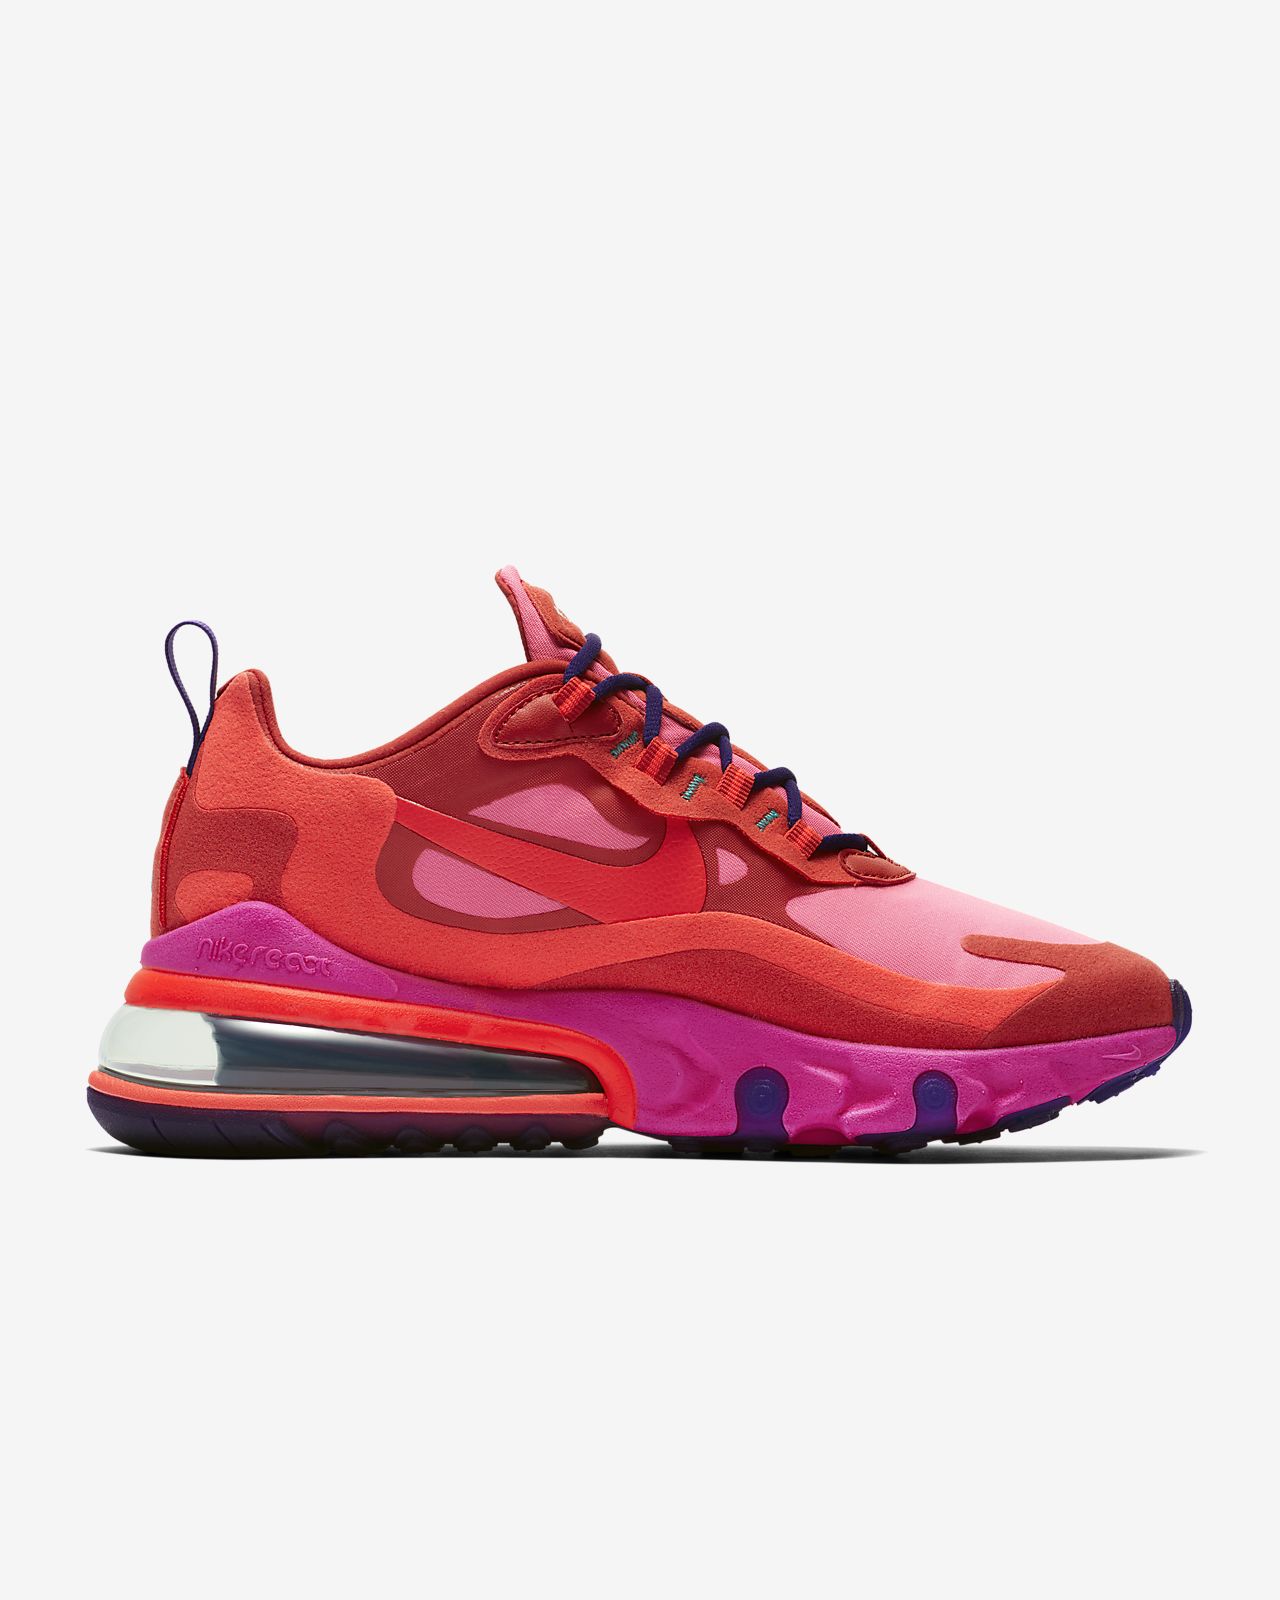 Purchase > nike air max 270 react dames sale, Up to 65% OFF